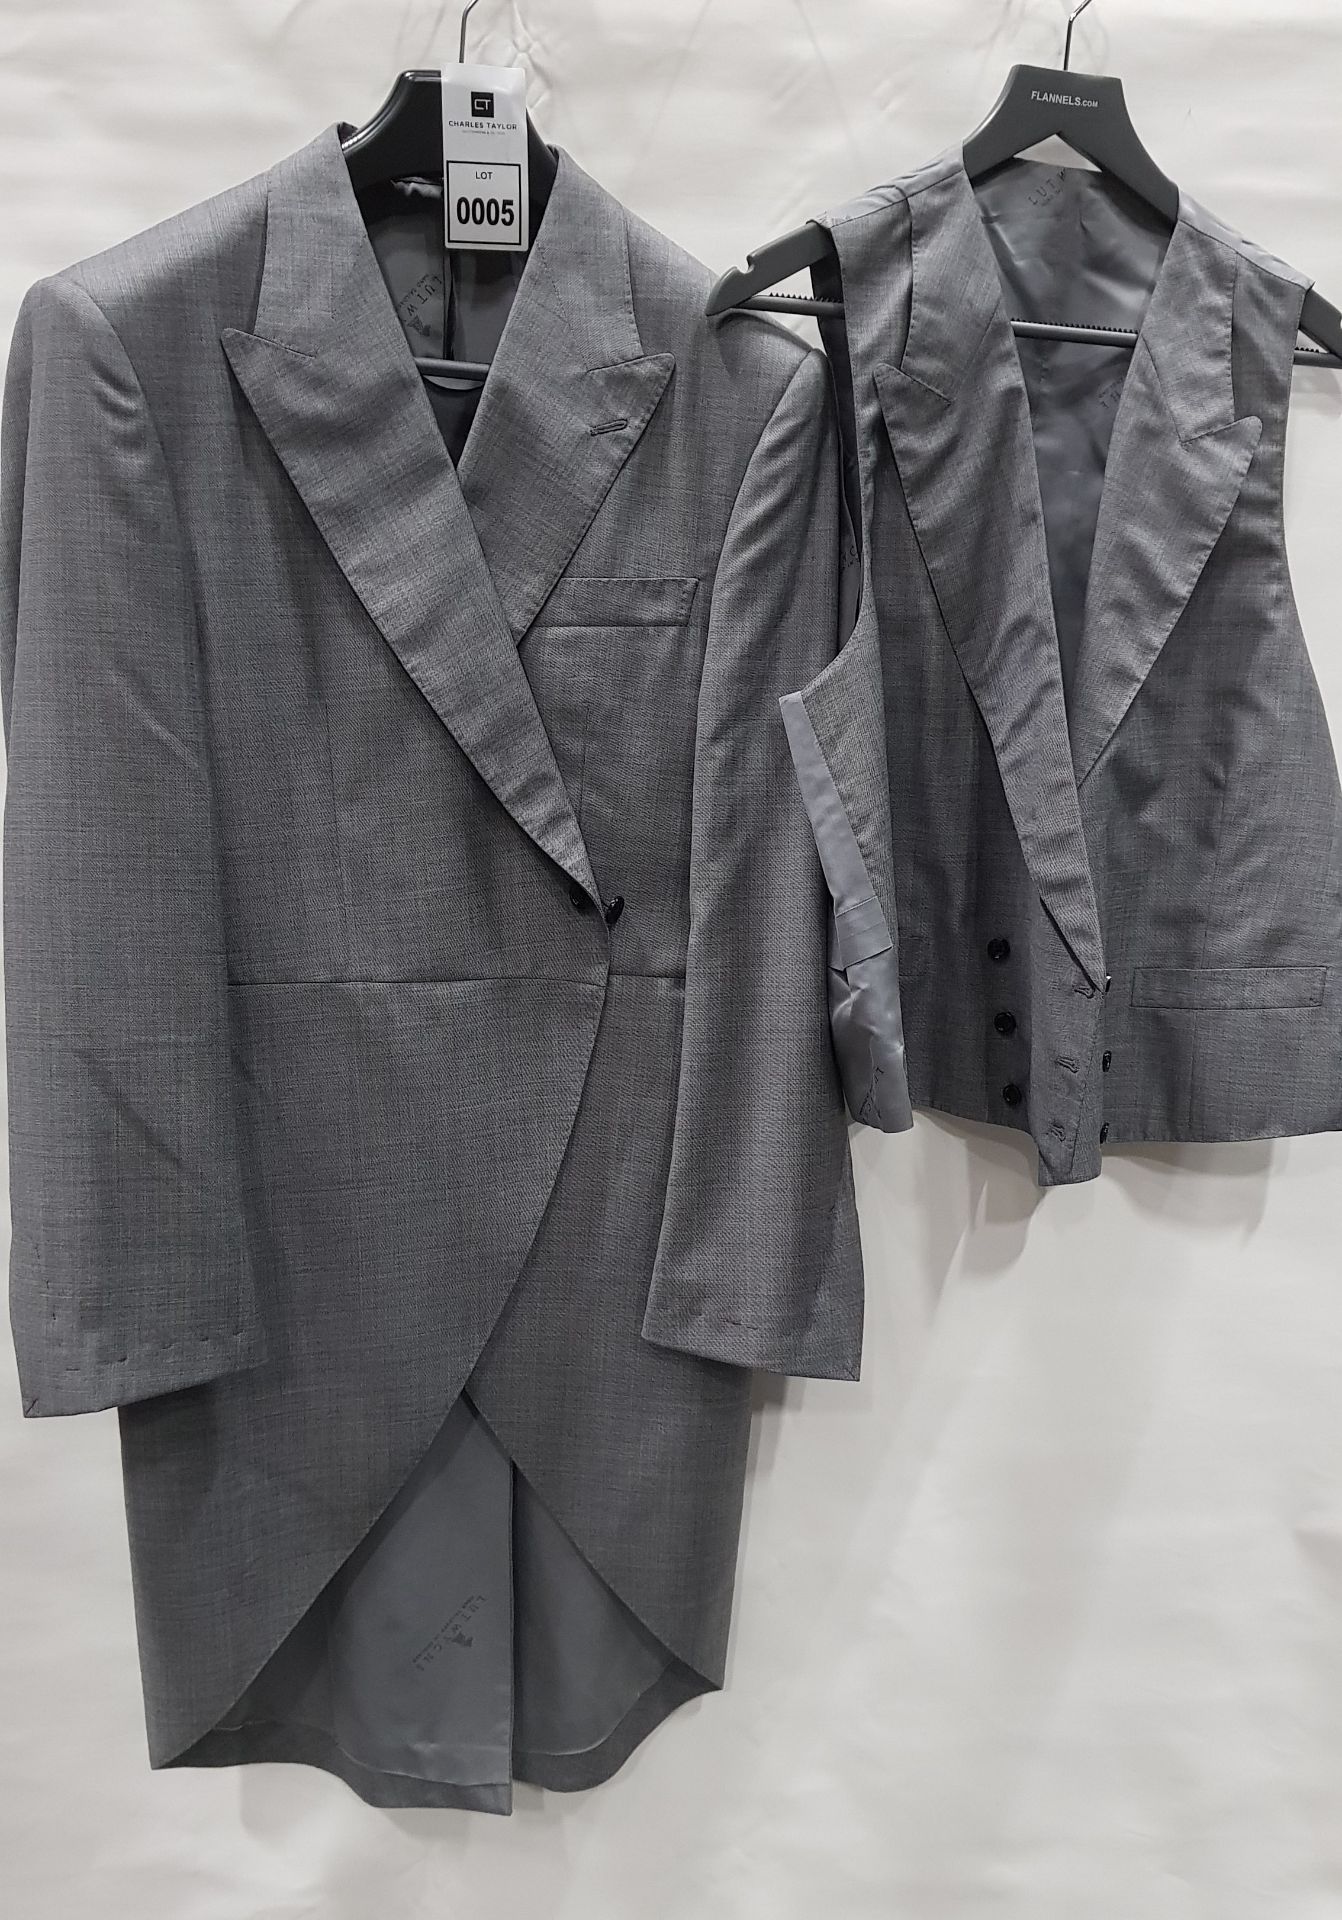 BRAND NEW LUTWYCHE GREY TAILCOAT & MATCHING TROUSERS (NOTE - NOT FULLY TAILORED) - SIZE 40R